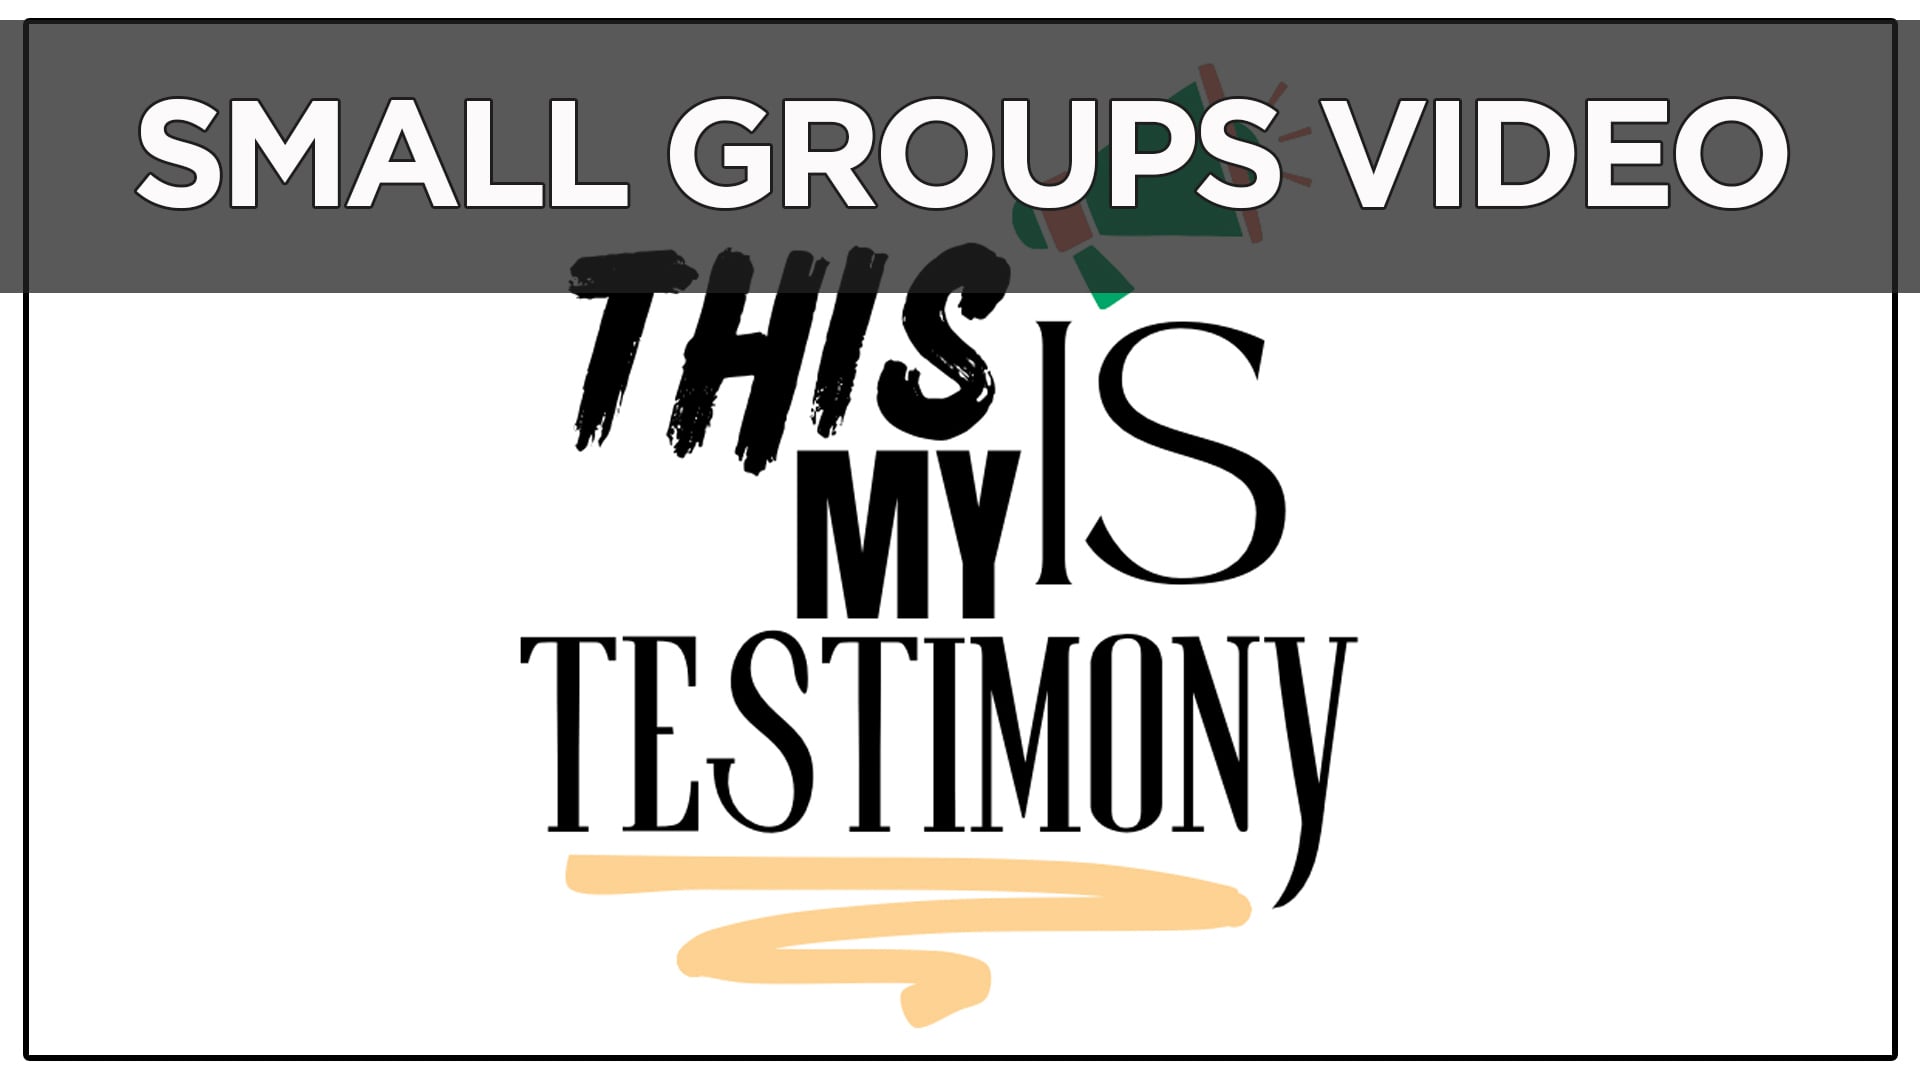 Small Groups Video: 6 Weeks of Testimony - Session 5